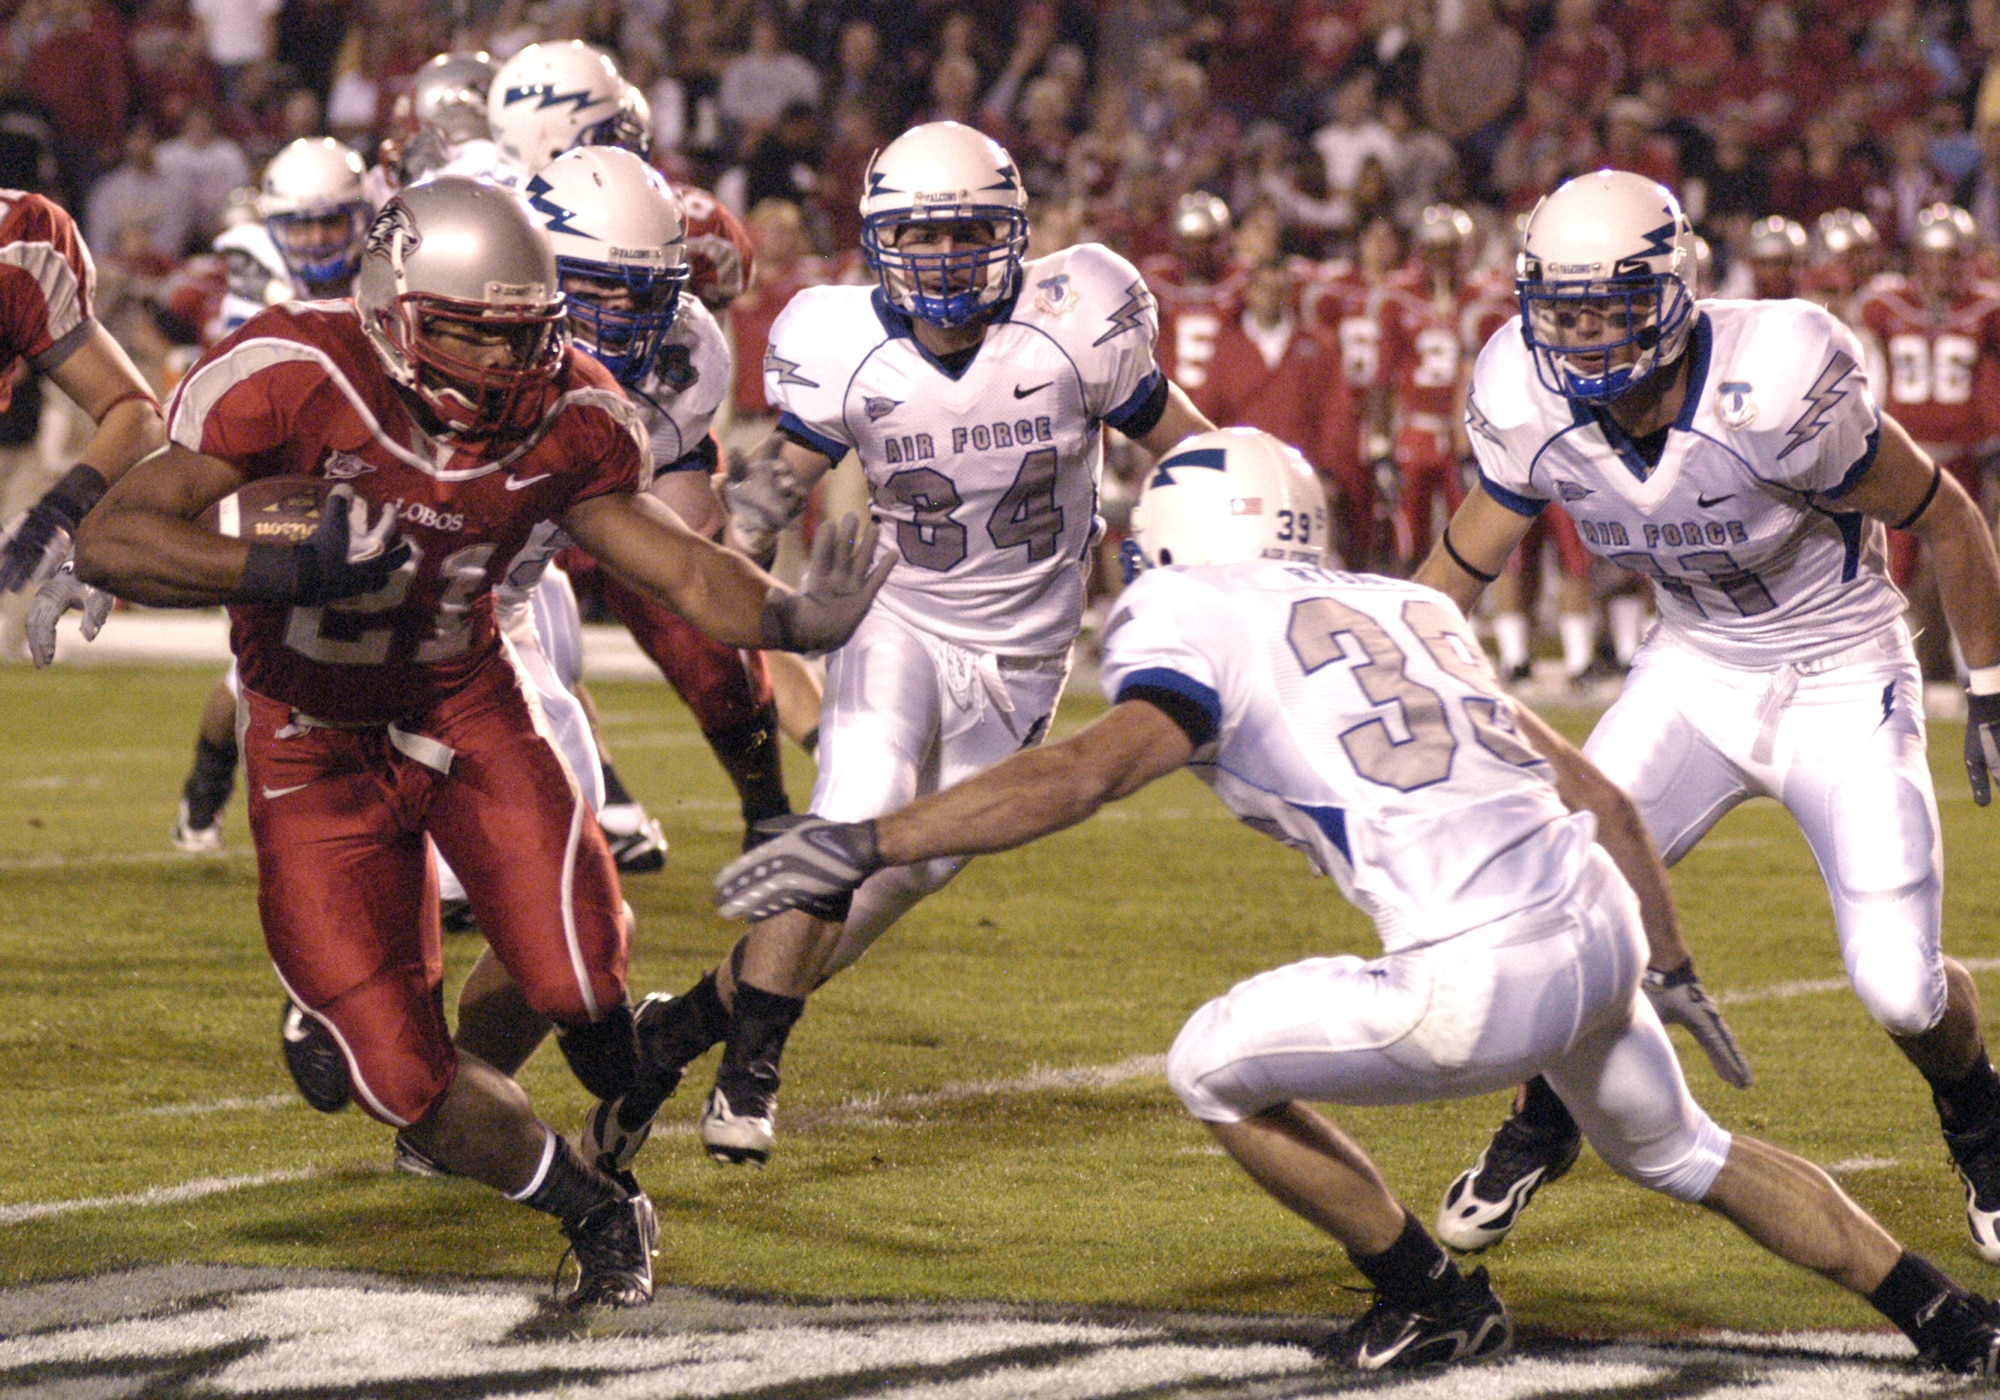 New Mexico tailback Rodney Ferguson tries to elude Falcon cornerback Garrett Ryback, 39, during the Lobos 34-31 win over Air Force Oct. 25 at University Stadium in Albuquerque. Ferguson ran a game-high 41 times for 146 yards and two touchdowns. (U.S. Air Force photo/John Van Winkle)       